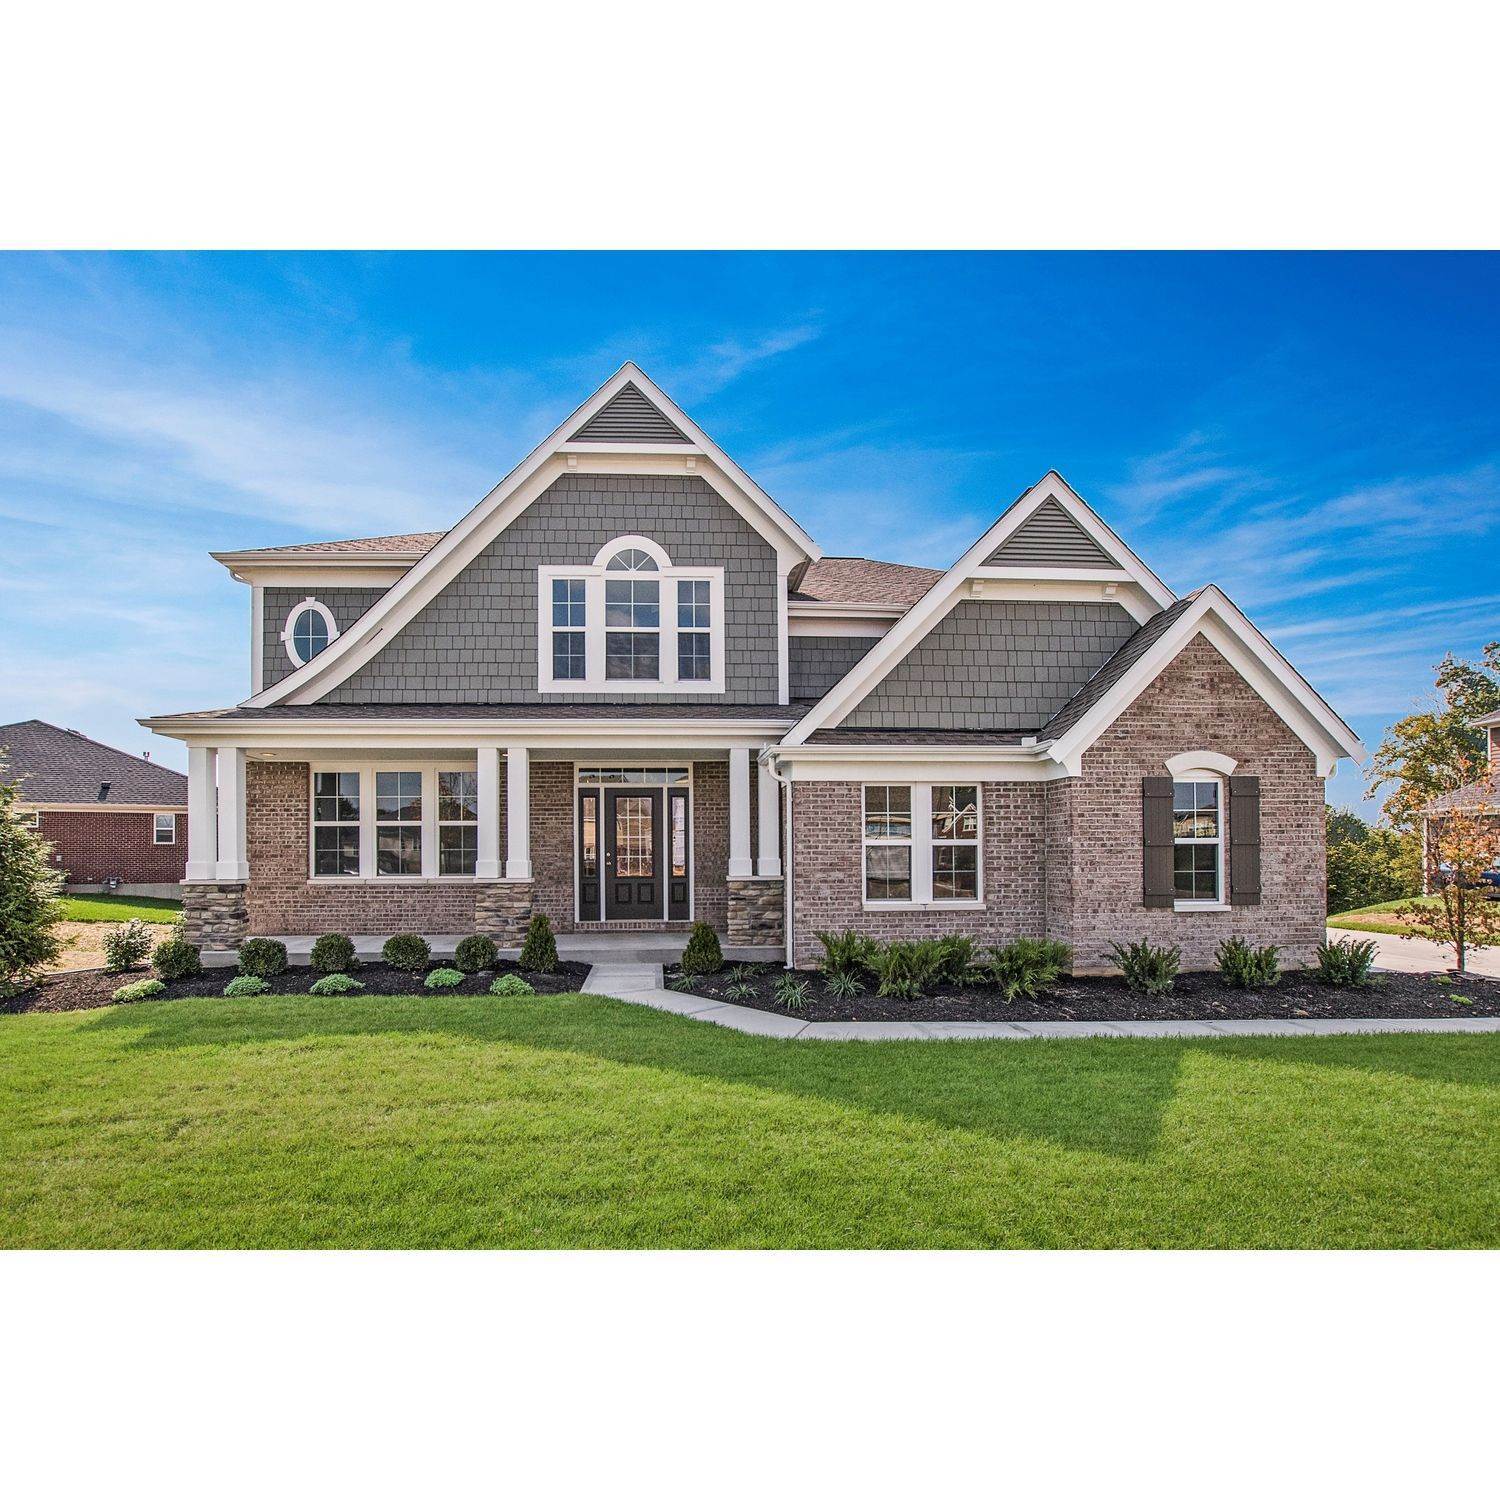 Single Family for Sale at Crescent Springs, KY 41017